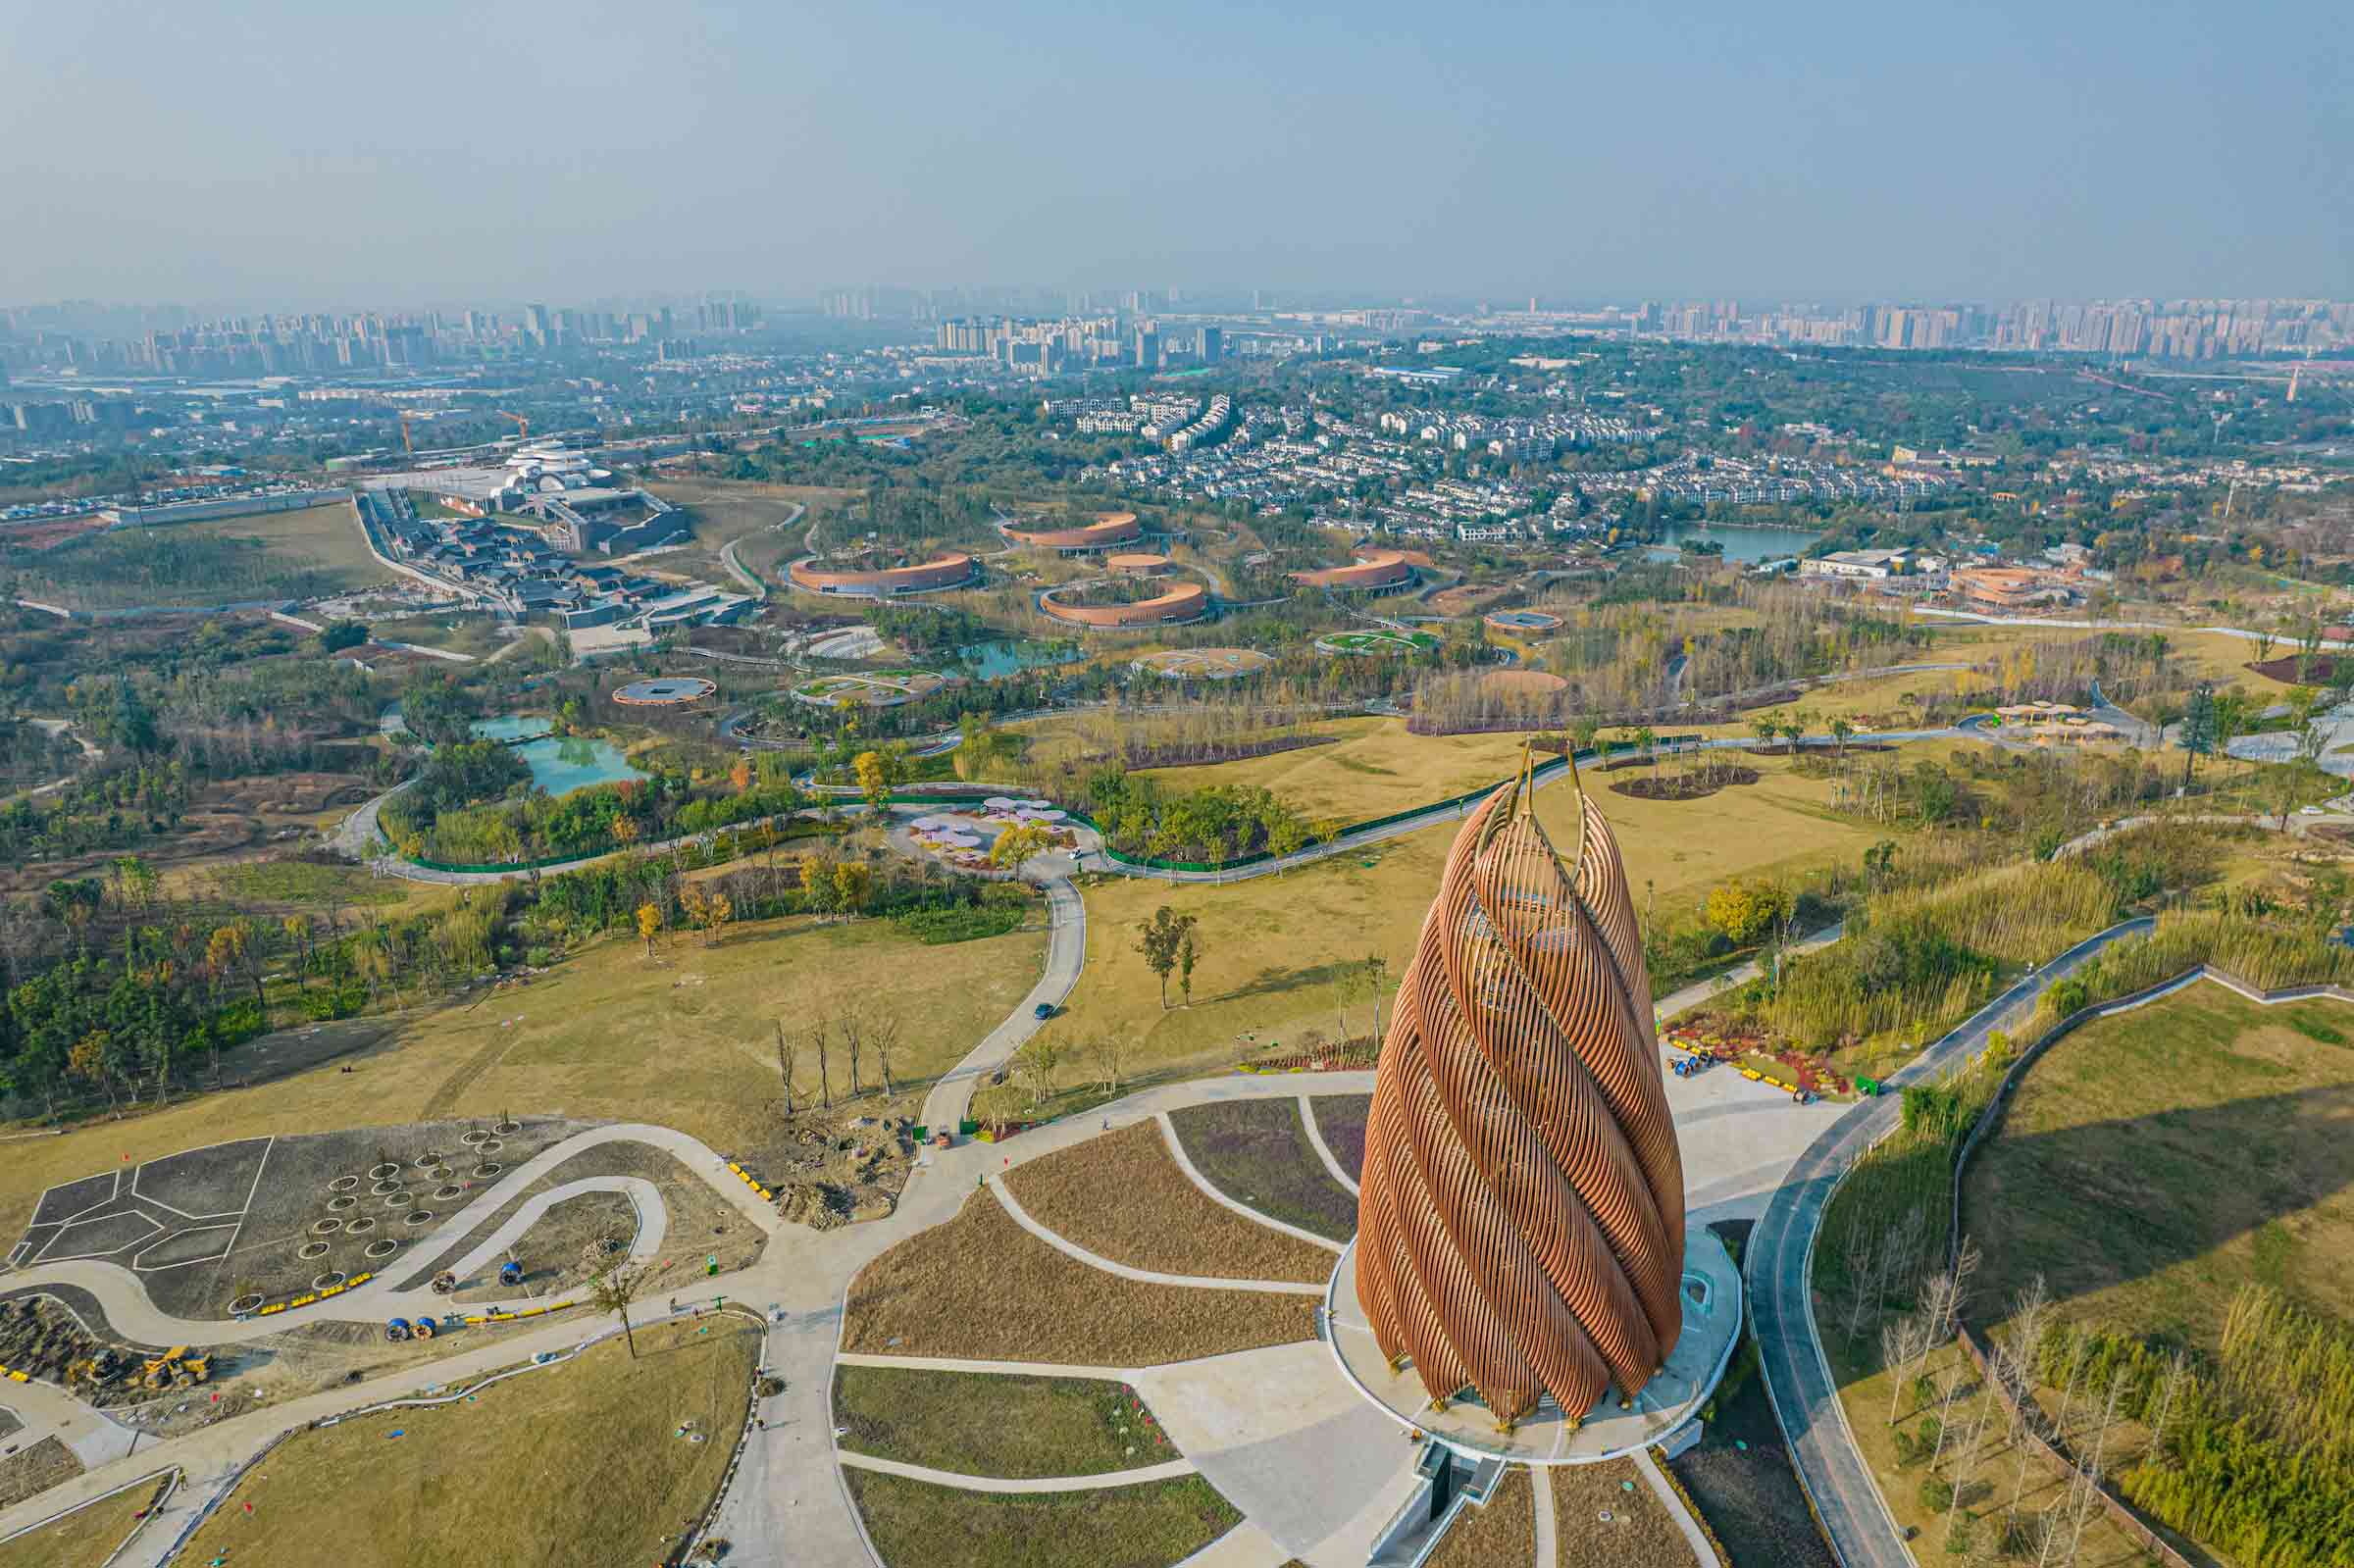 Chengdu Giant Panda Breeding Research Base Expansion Project by Shanghai TIANHUA Urban Planning & Design Co., Ltd.